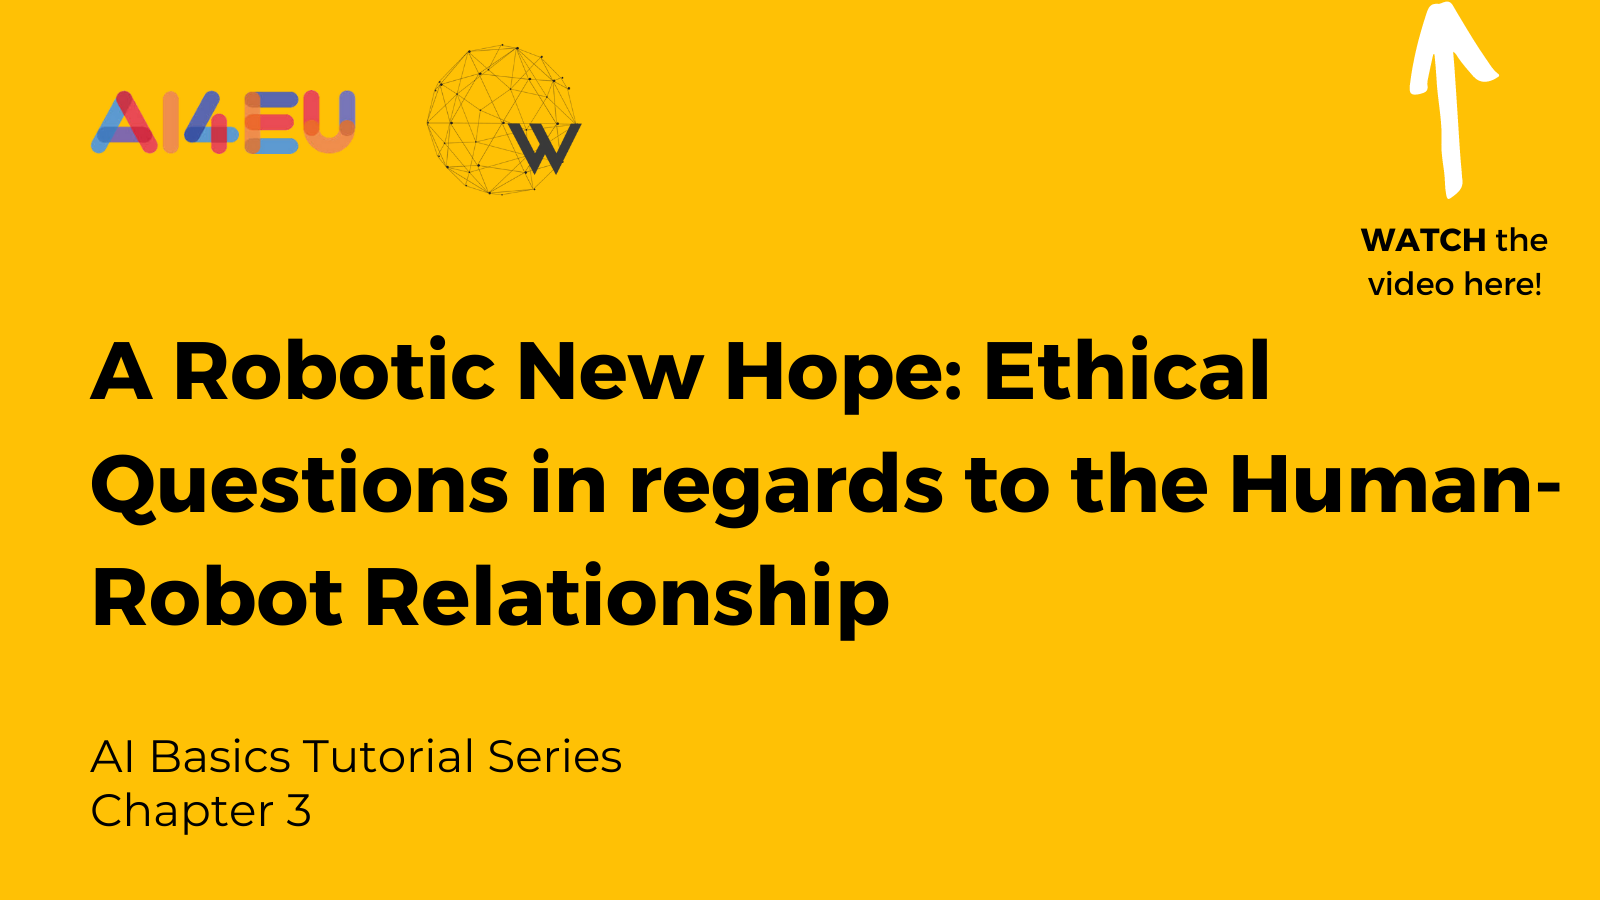 A Robotic New Hope Ethical Questions in regards to the Human-Robot Relationship - Chapter 3